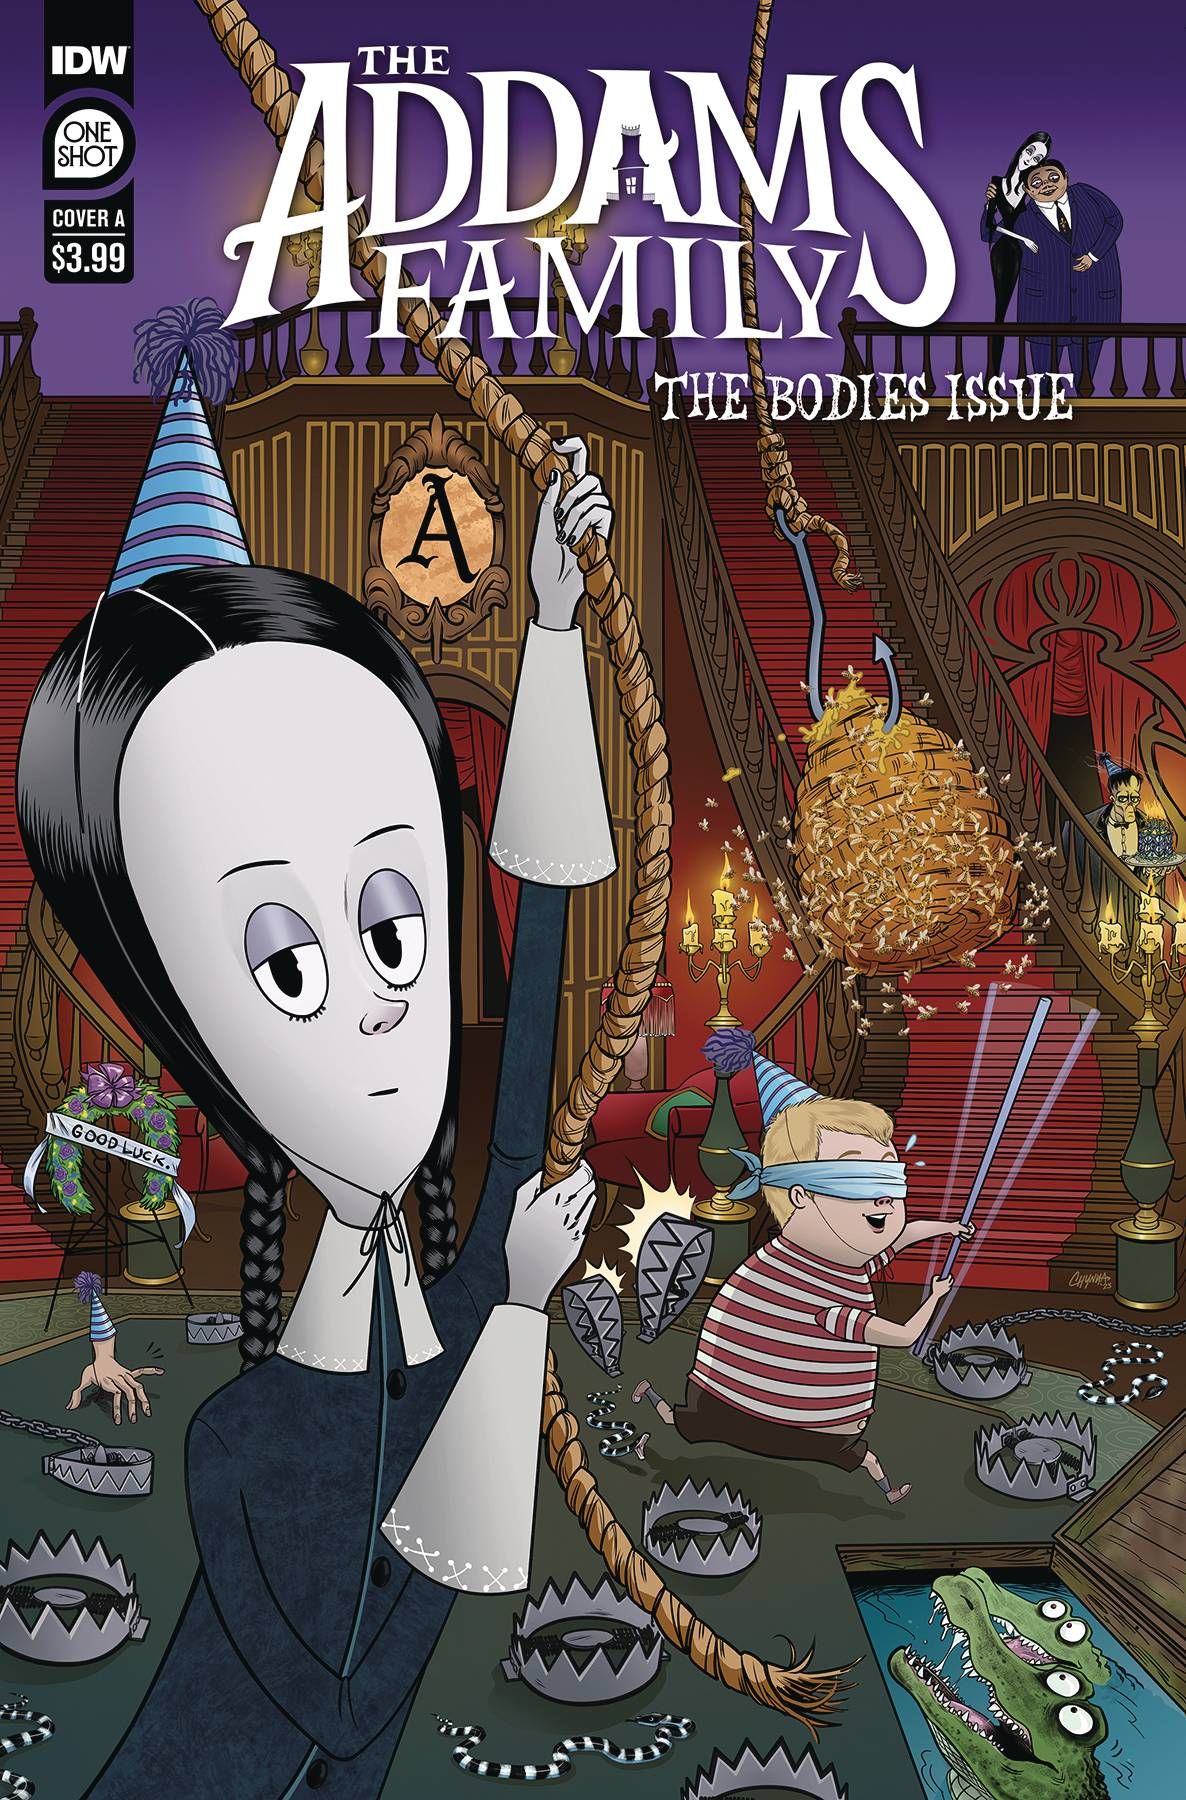 The Addams Family The Bodies Issue cover